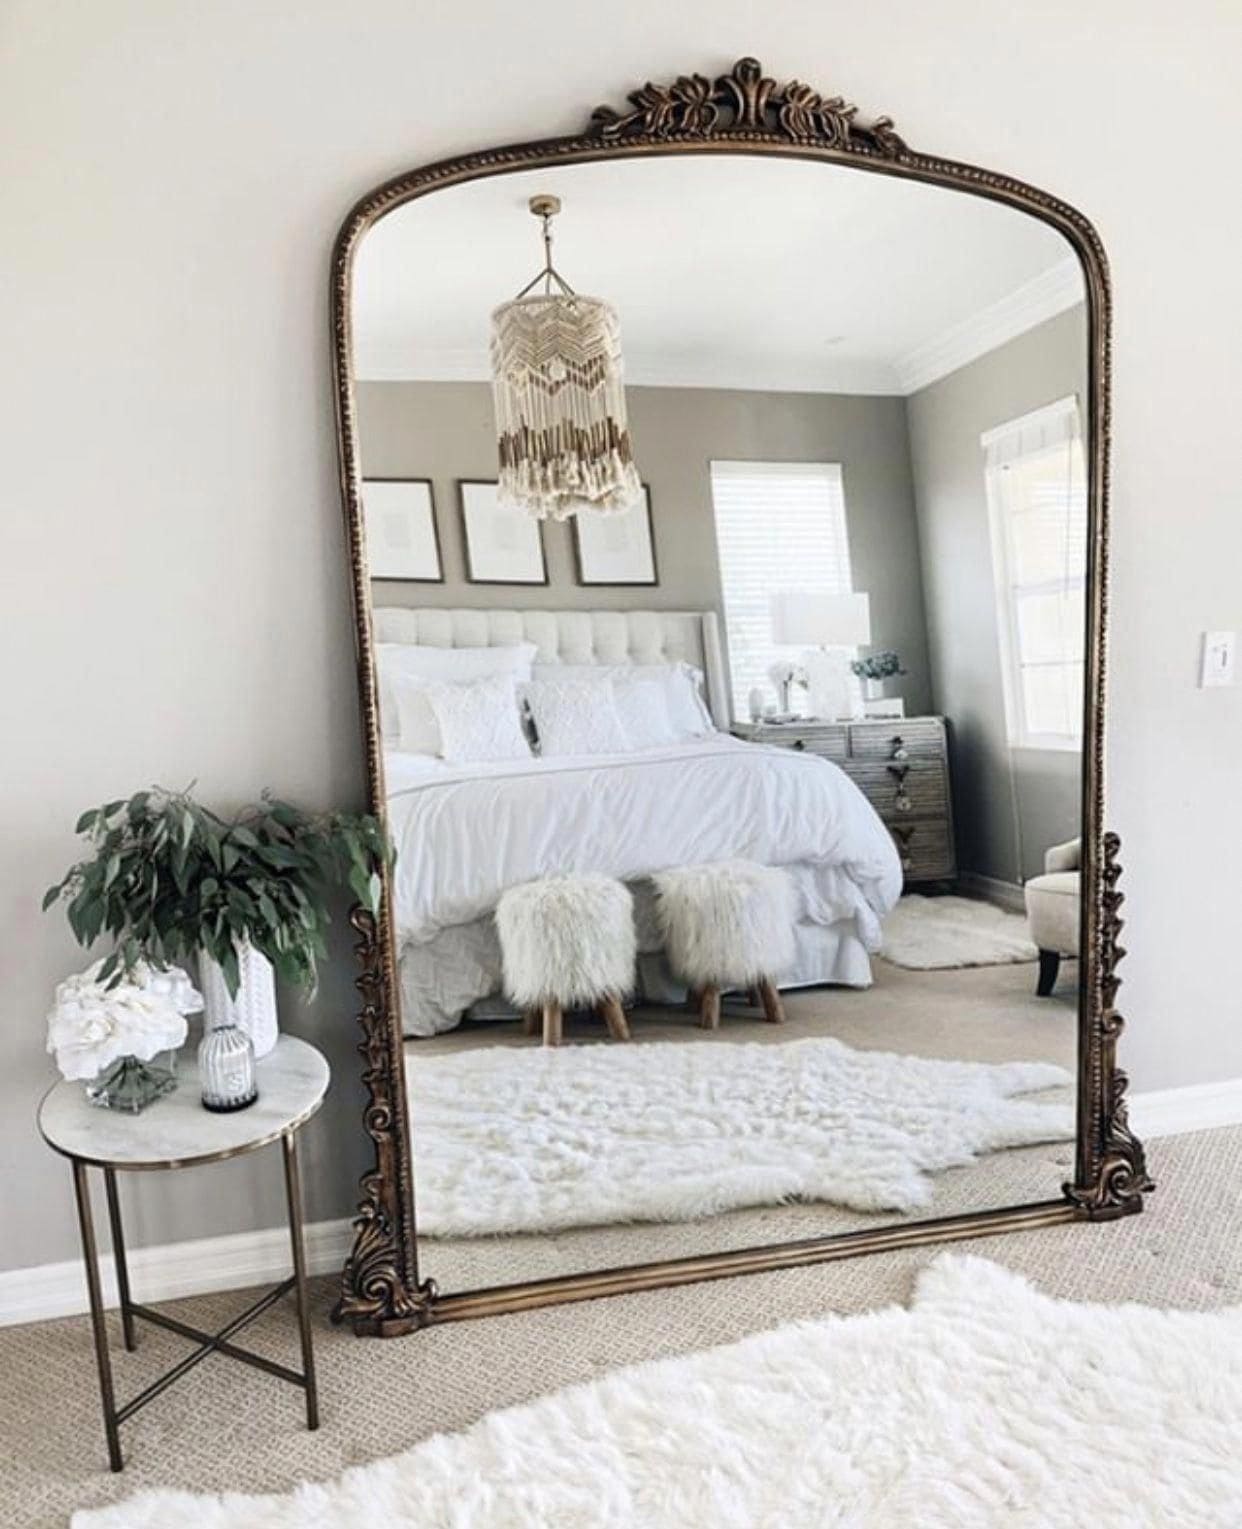 25 beautiful bedroom mirror ideas that will blow your mind - 77